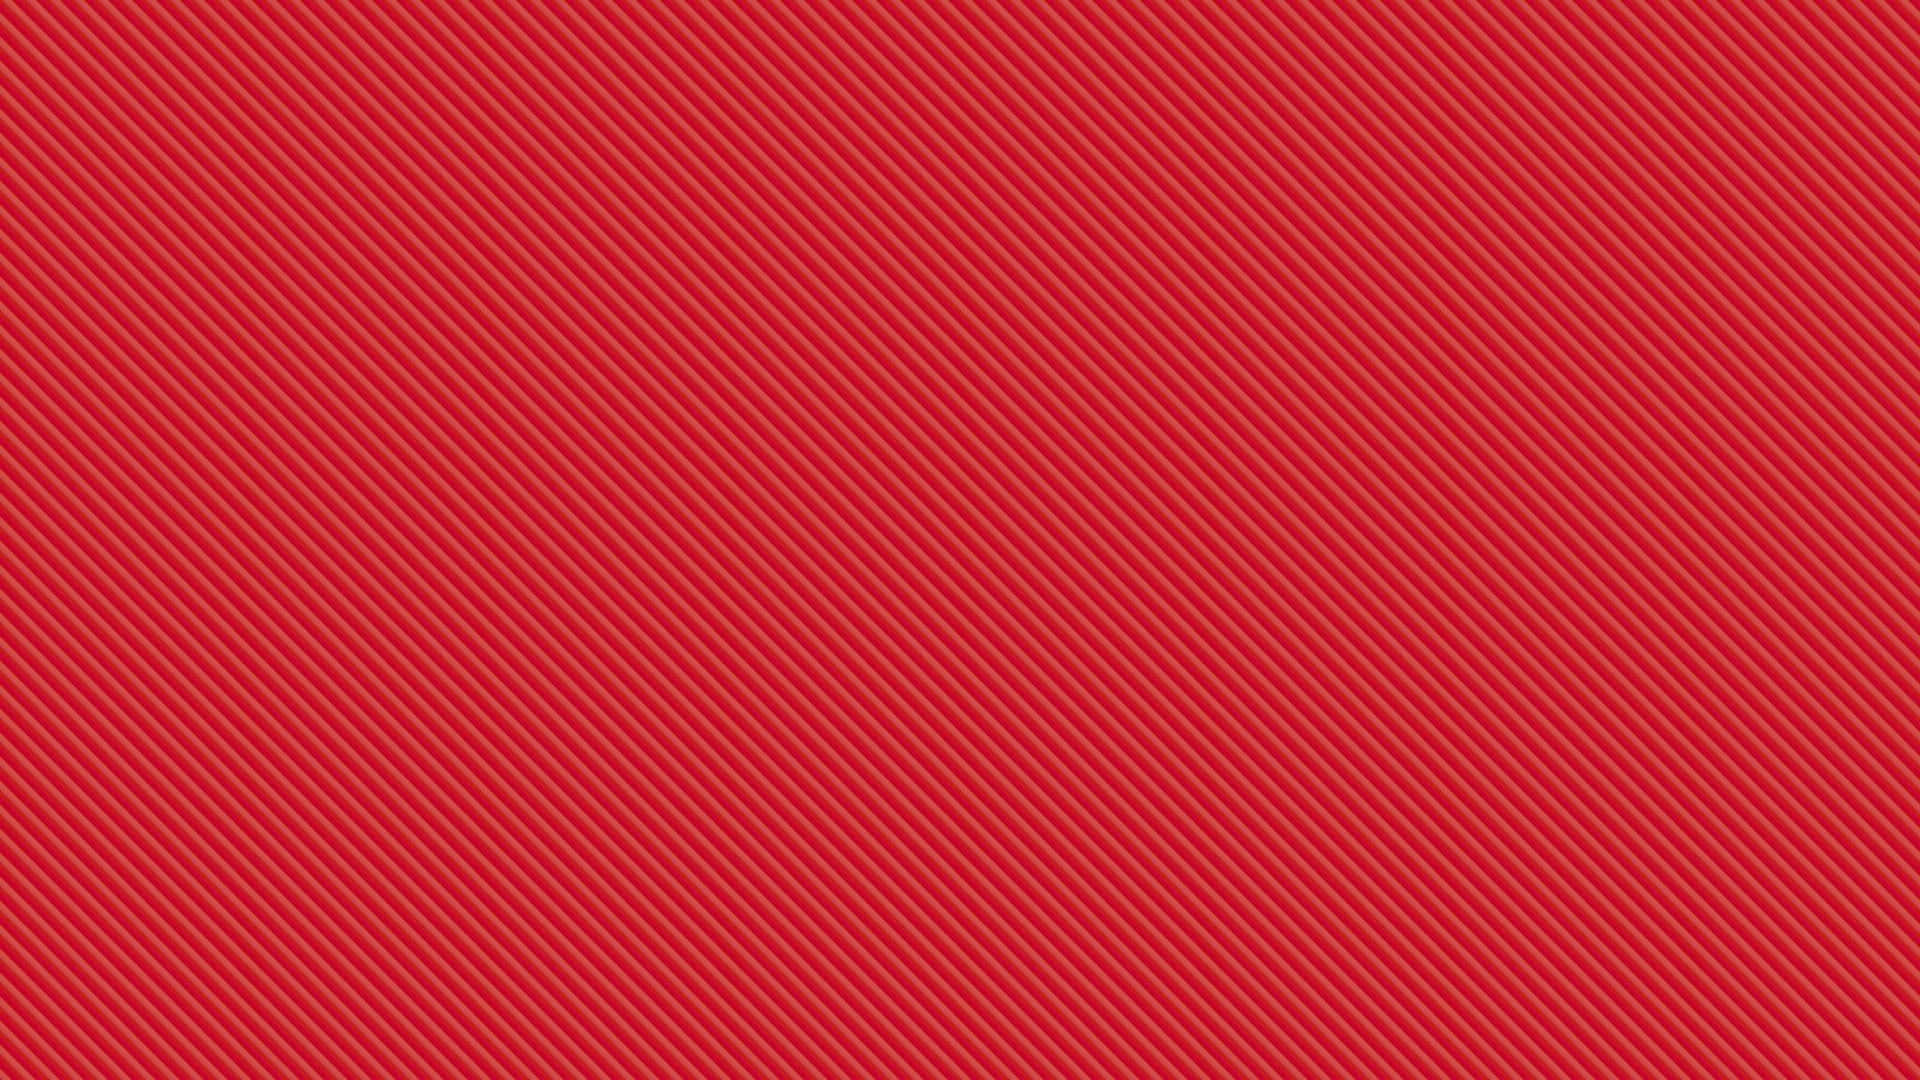 Striped Patterns Light Red Background